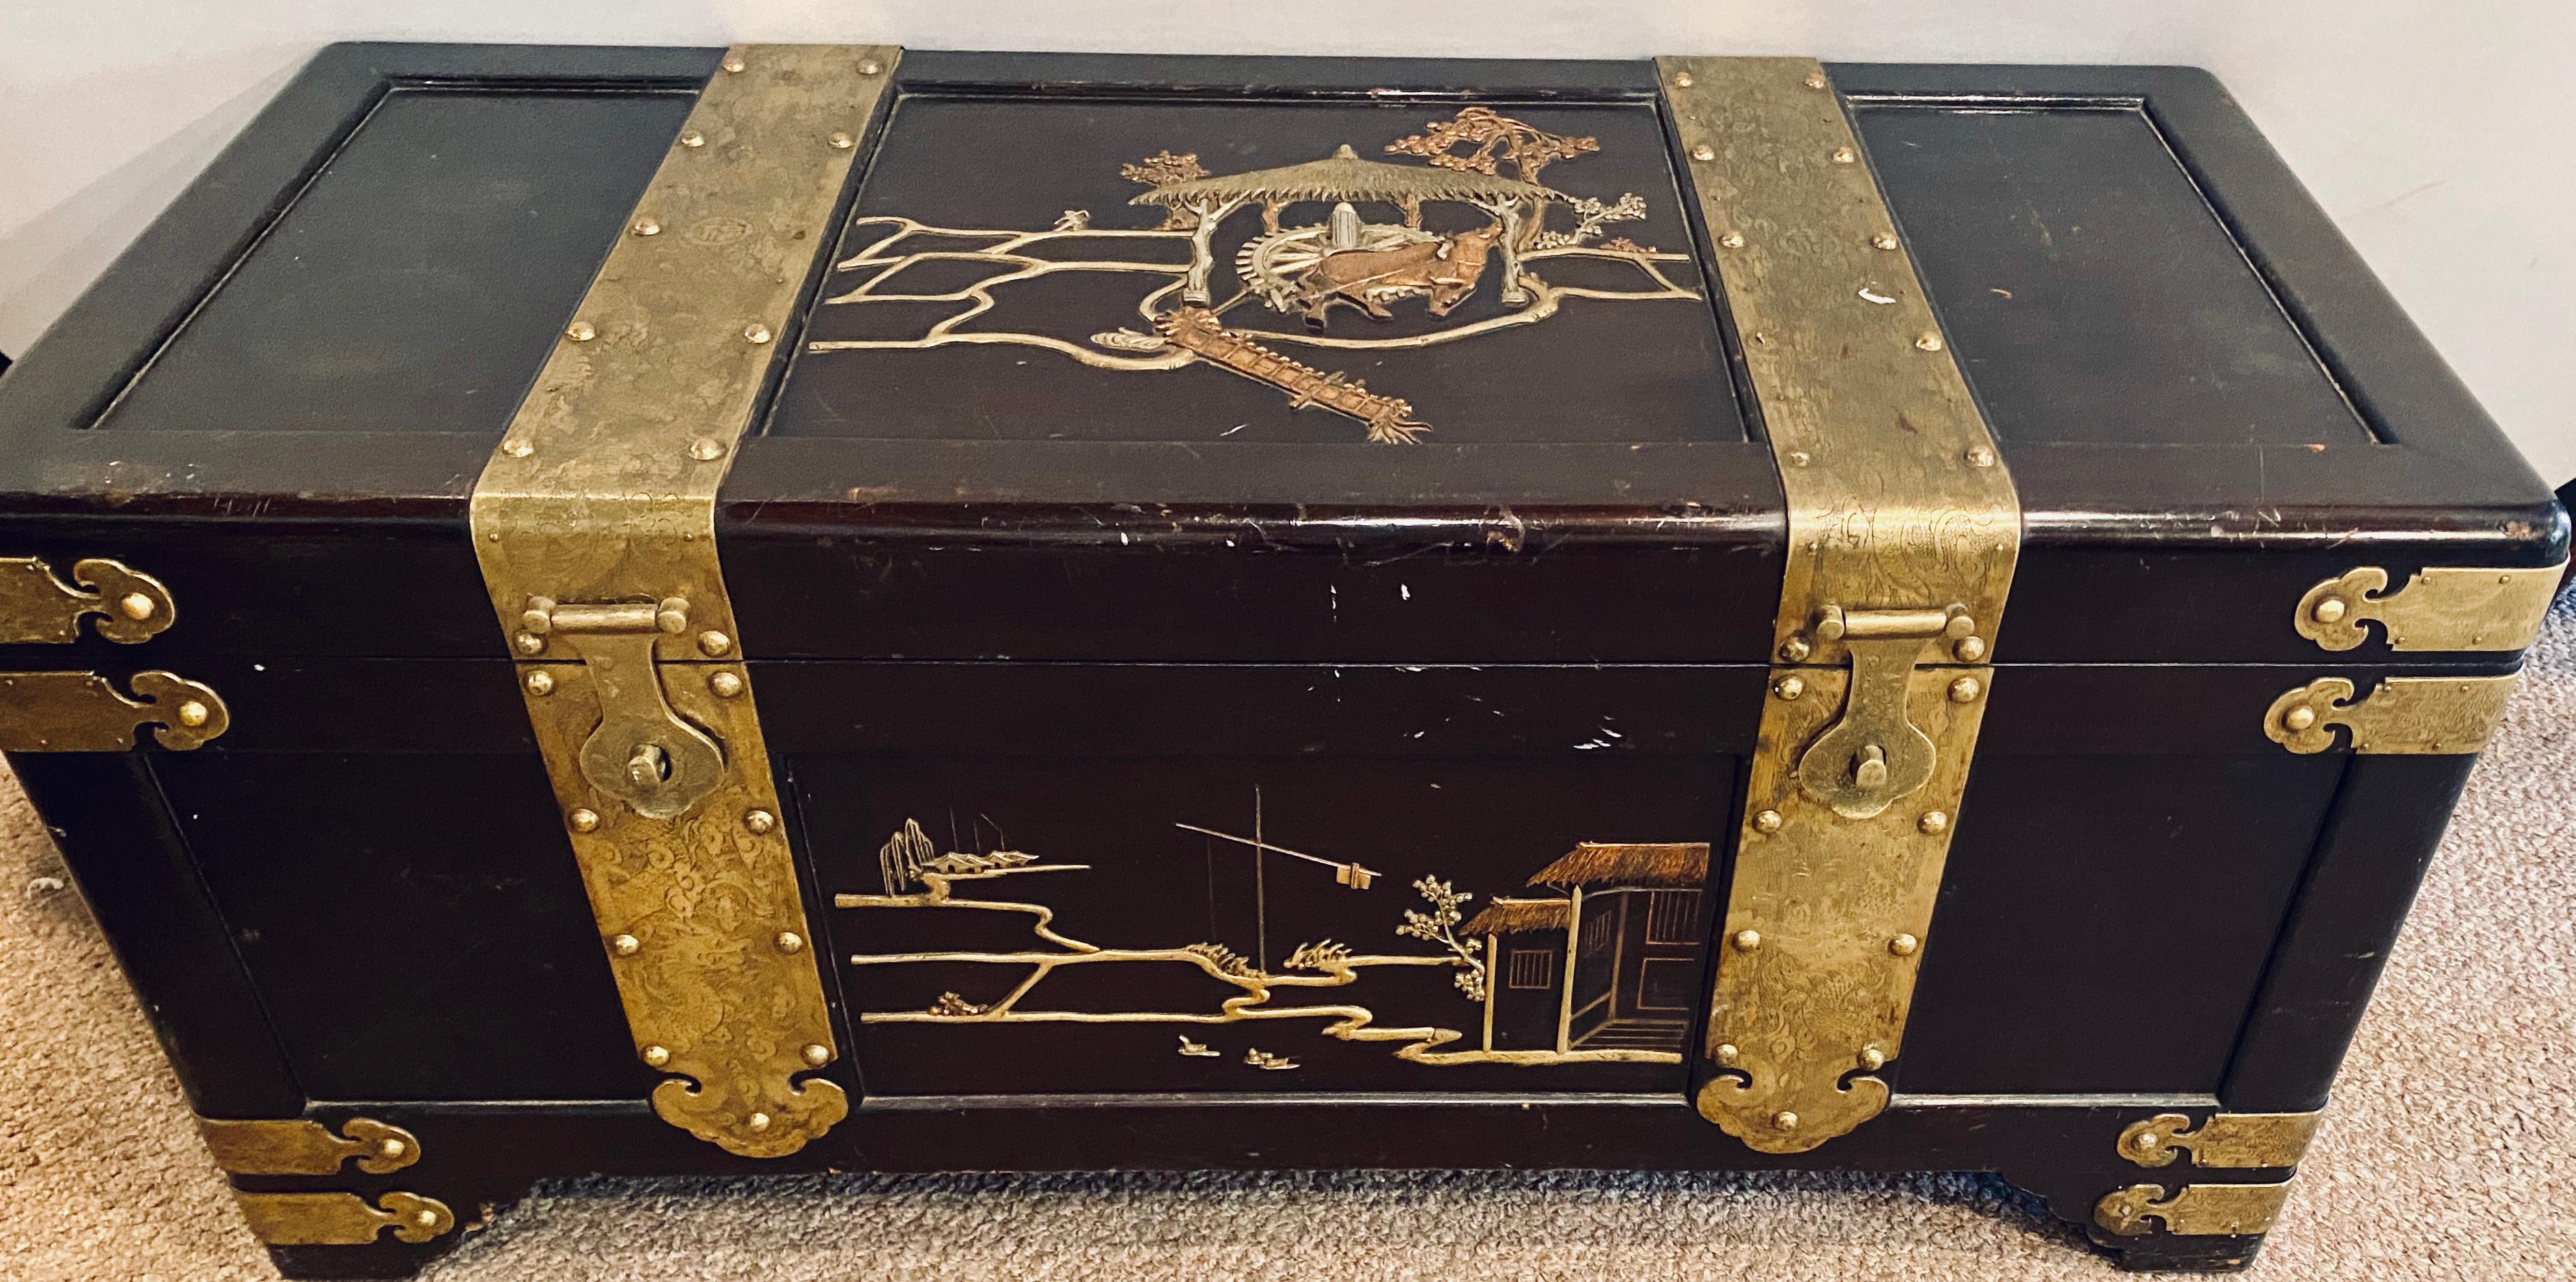 Chinese Export 1920s Asian Dowry, Blanket or Storage Chest, Bronze Decorated J. L. George For Sale